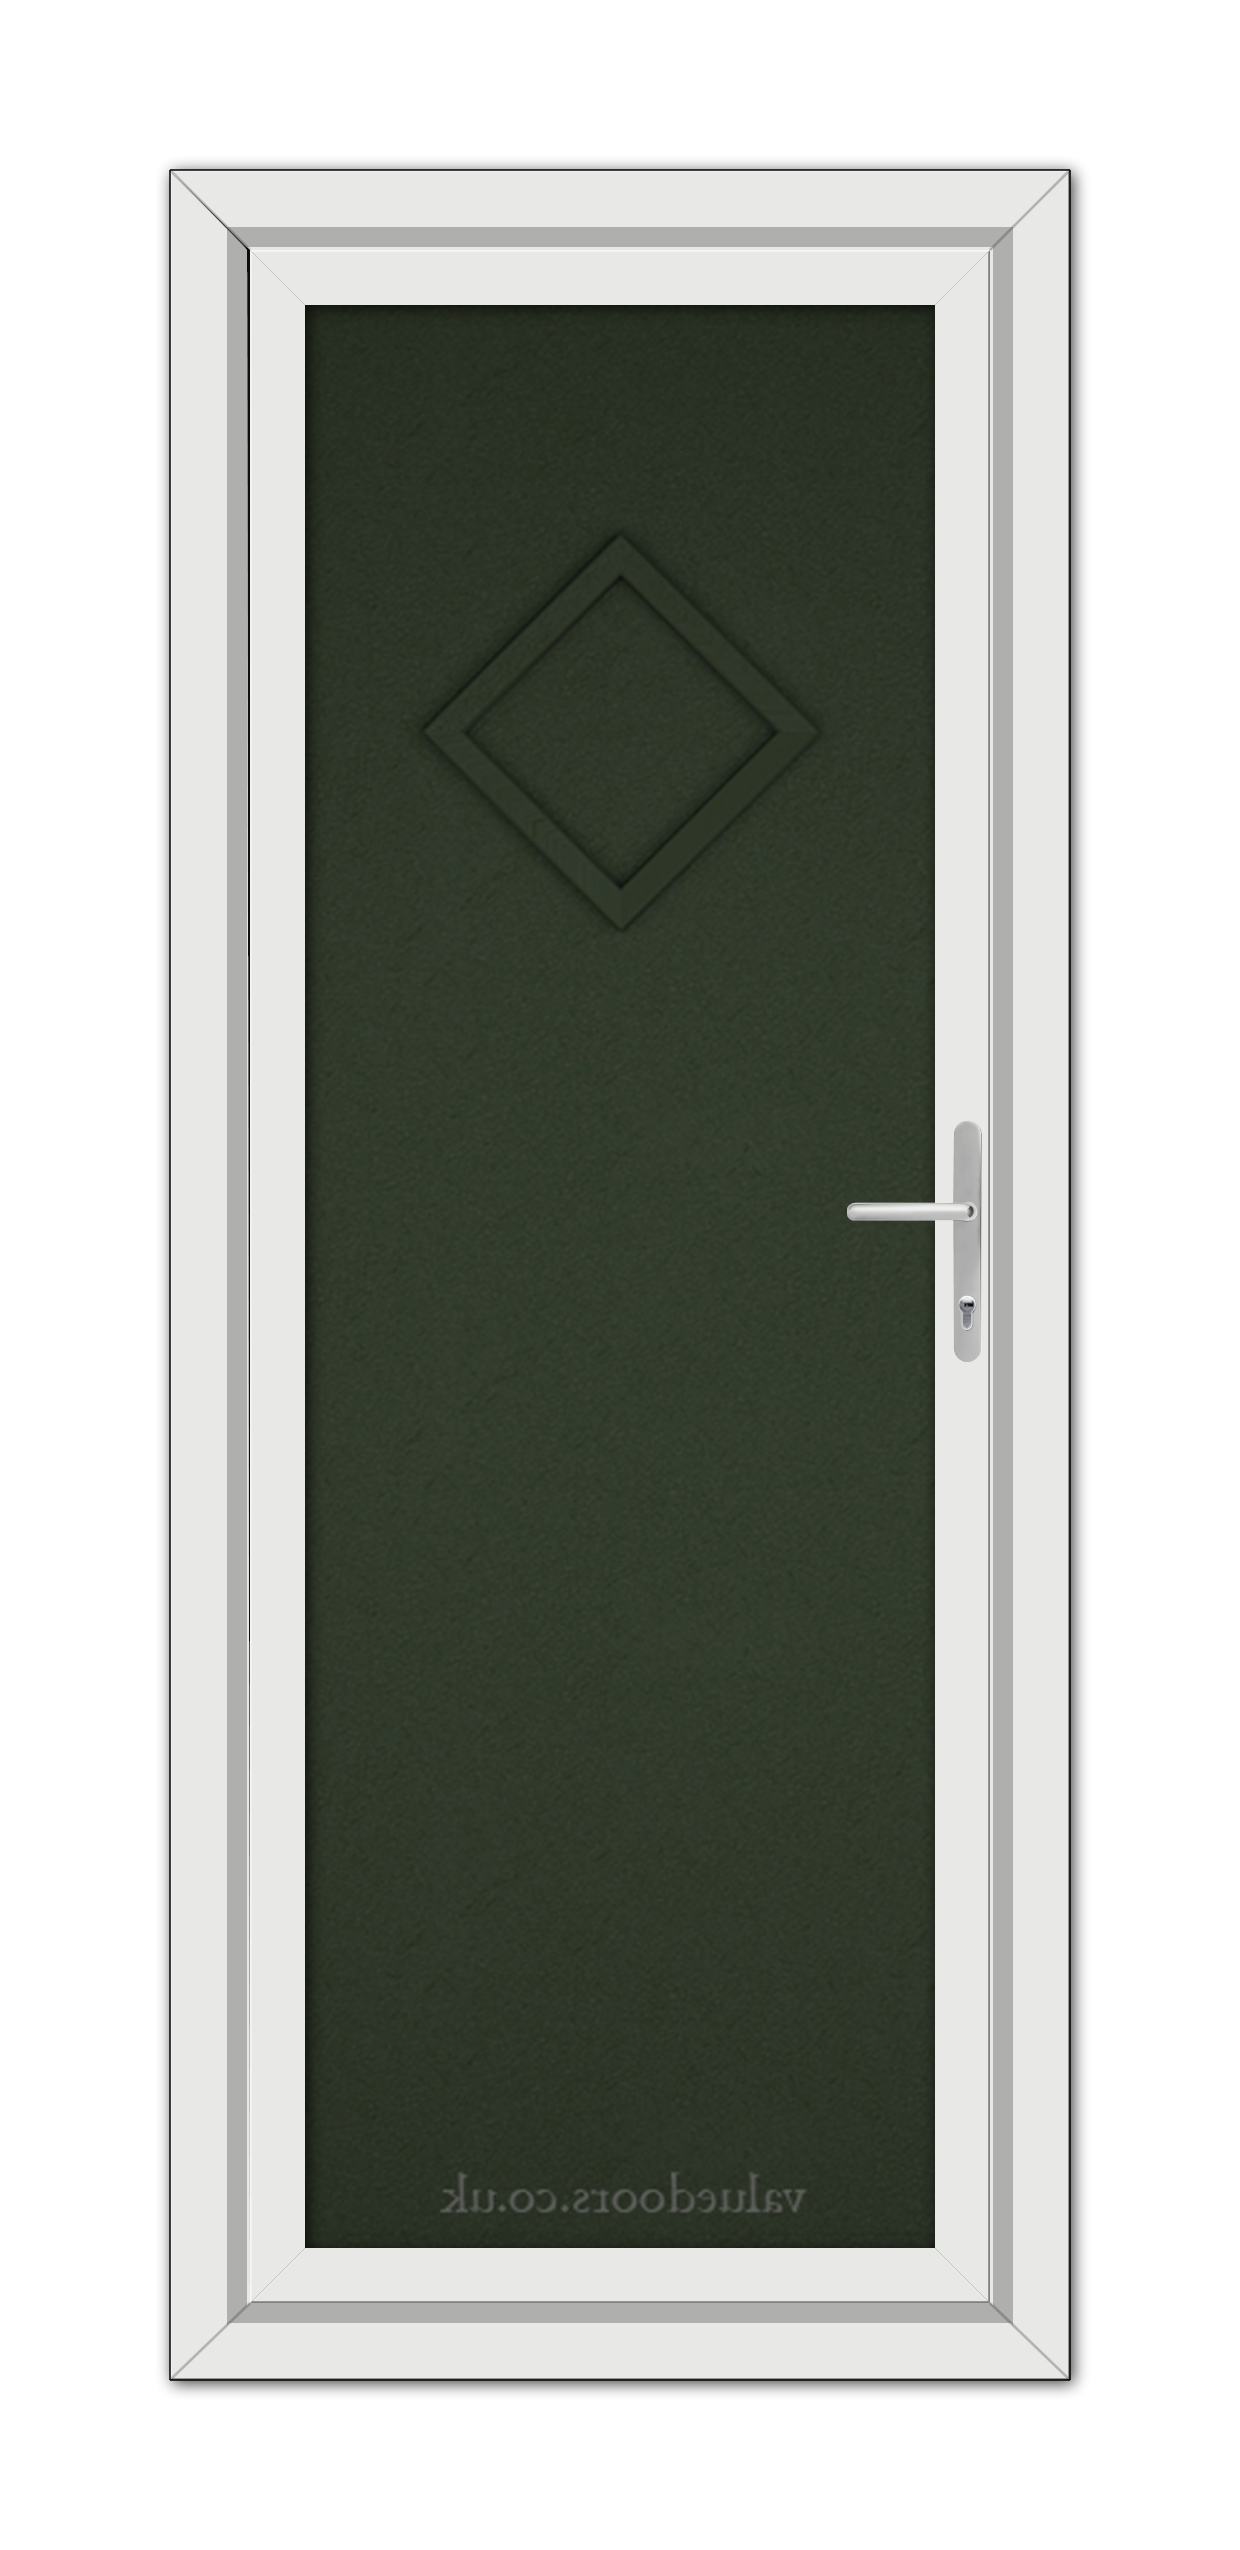 A vertical image of a Green Modern 5131 Solid uPVC door with a diamond-shaped panel, framed in white, featuring a silver handle on the right side.